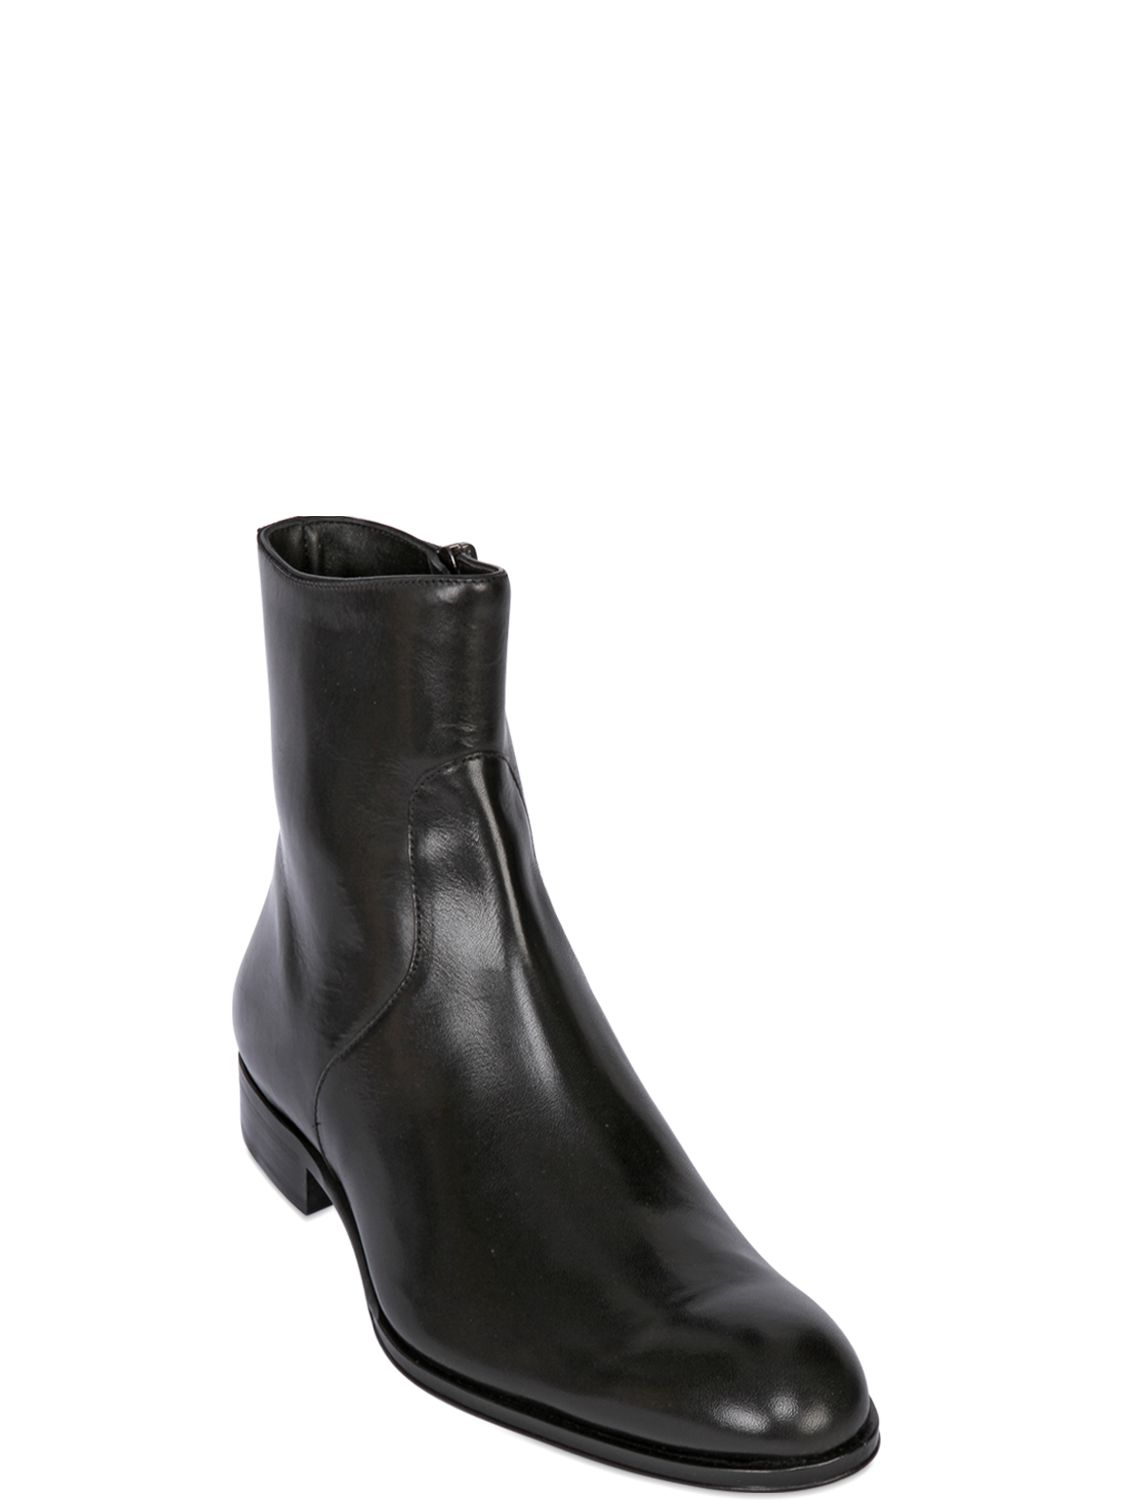 Mr. hare Zip Up Leather Chelsea Boots in Black for Men | Lyst